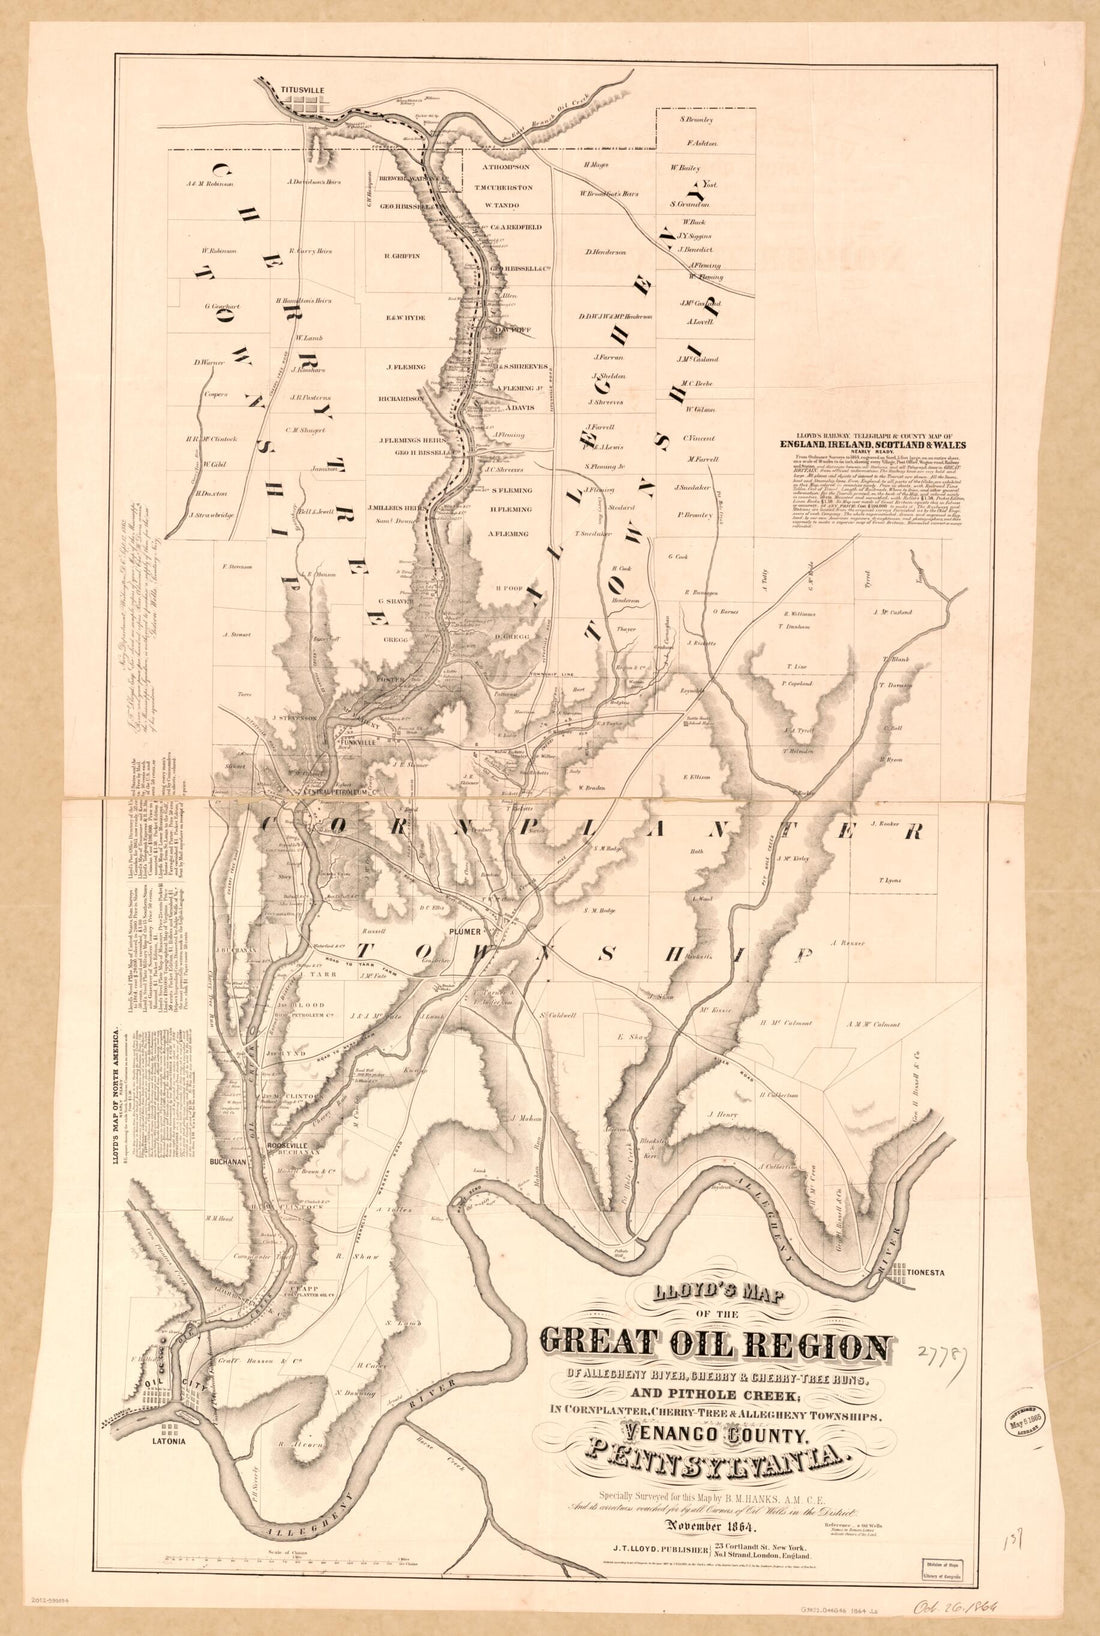 This old map of Tree Runs, and Pithole Creek : In Cornplanter, Cherry-Tree &amp; Allegheny Townships, Venango County, Pennsylvania (Tree Runs, and Pithole Creek) from 1864 was created by James T. Lloyd in 1864